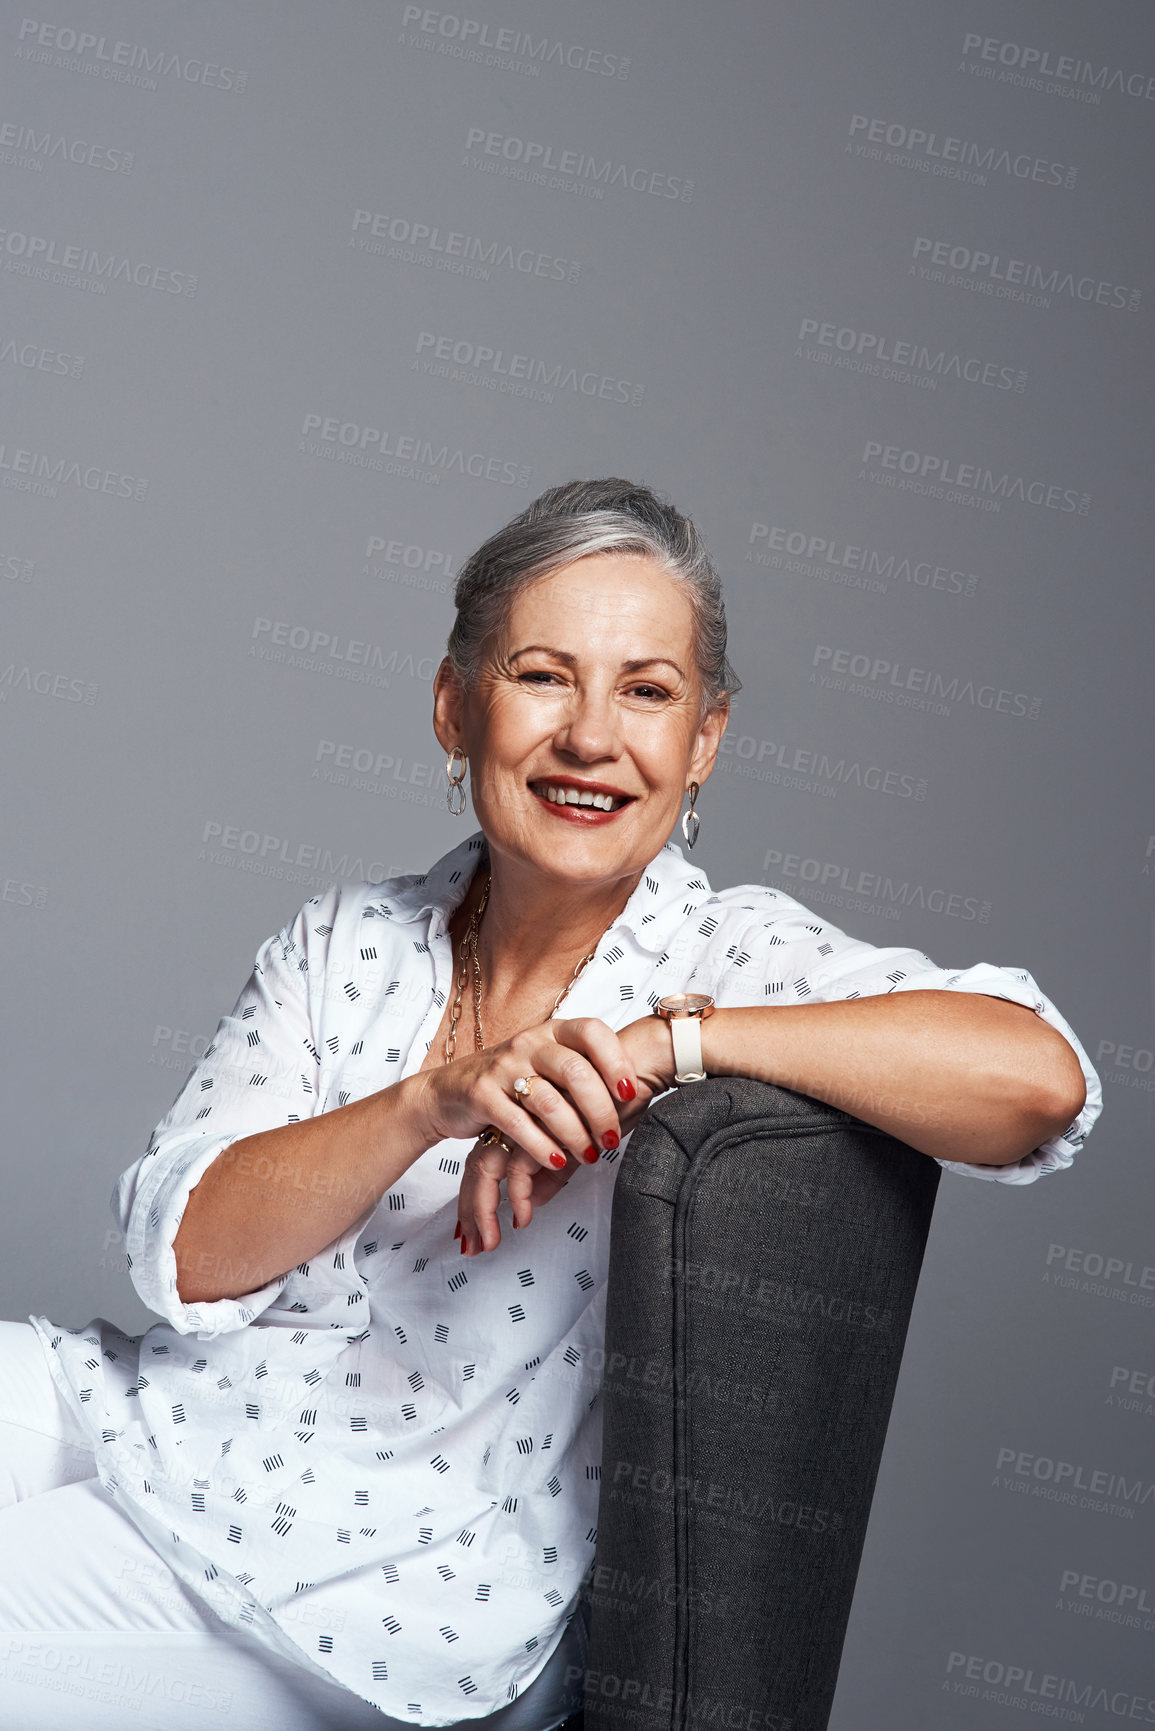 Buy stock photo Studio shot of a senior woman sitting on a chair against a grey background